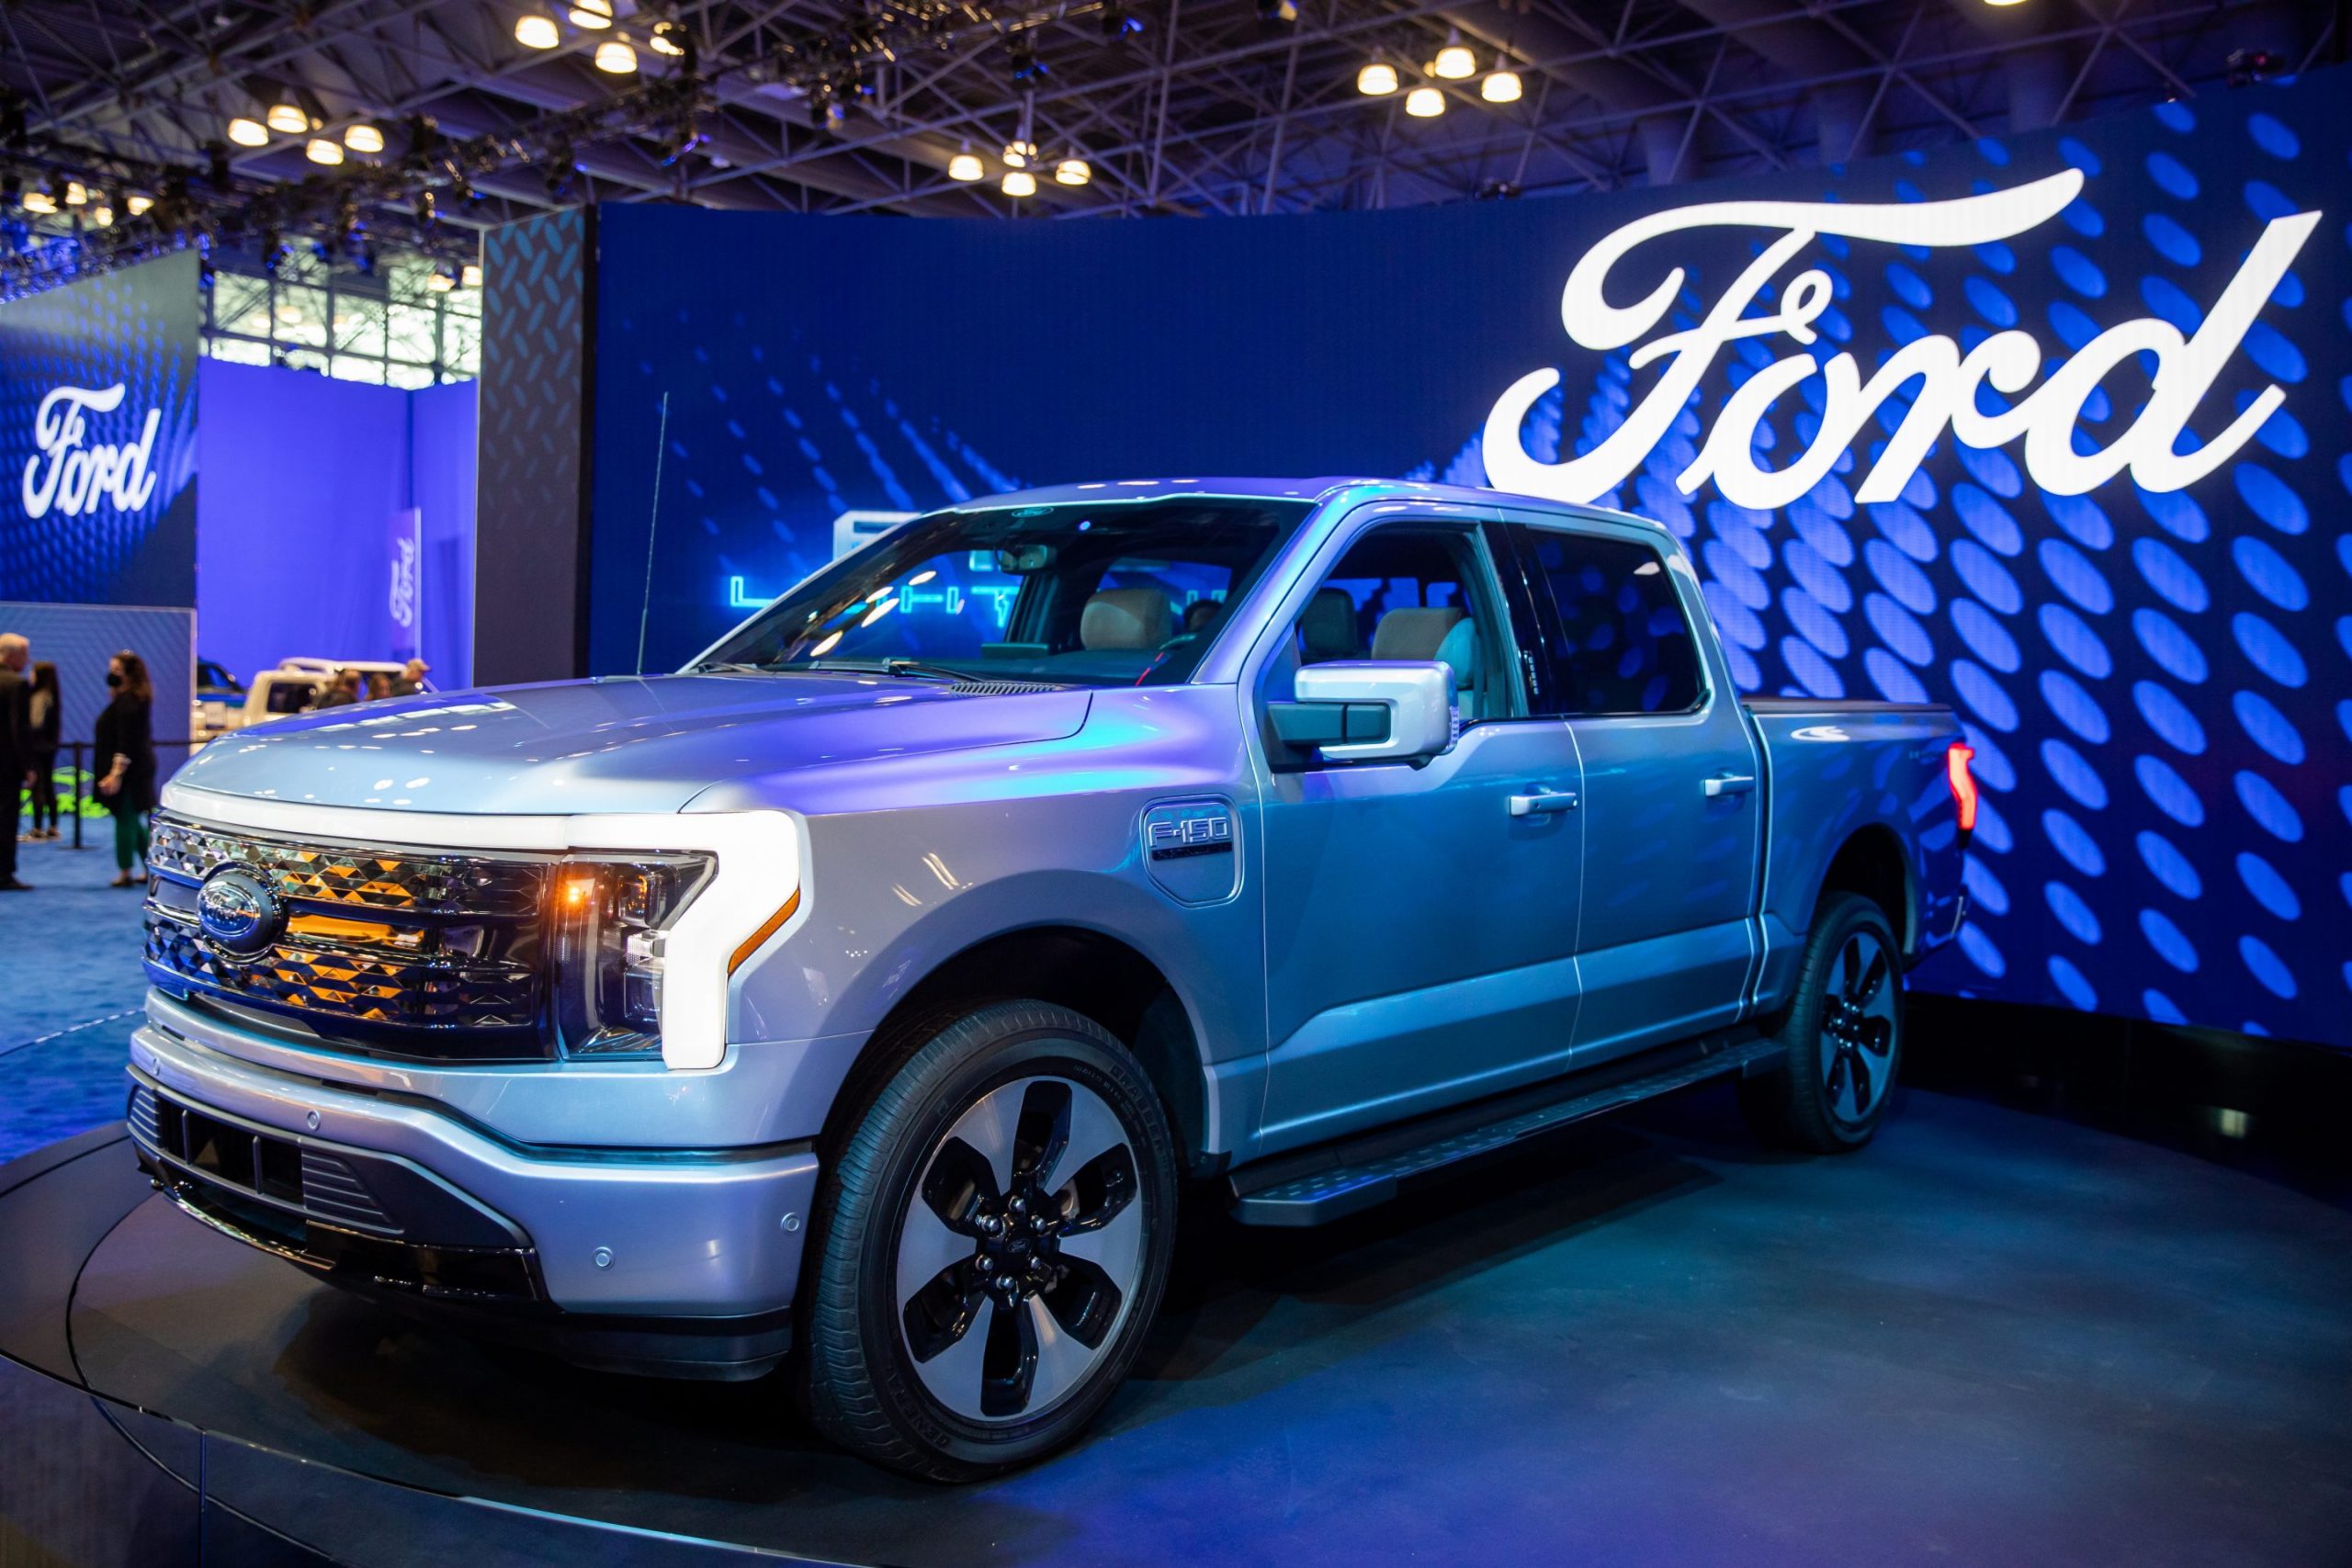 Ford is 'betting the company' on a Tesla-style EV truck that could make or break its future